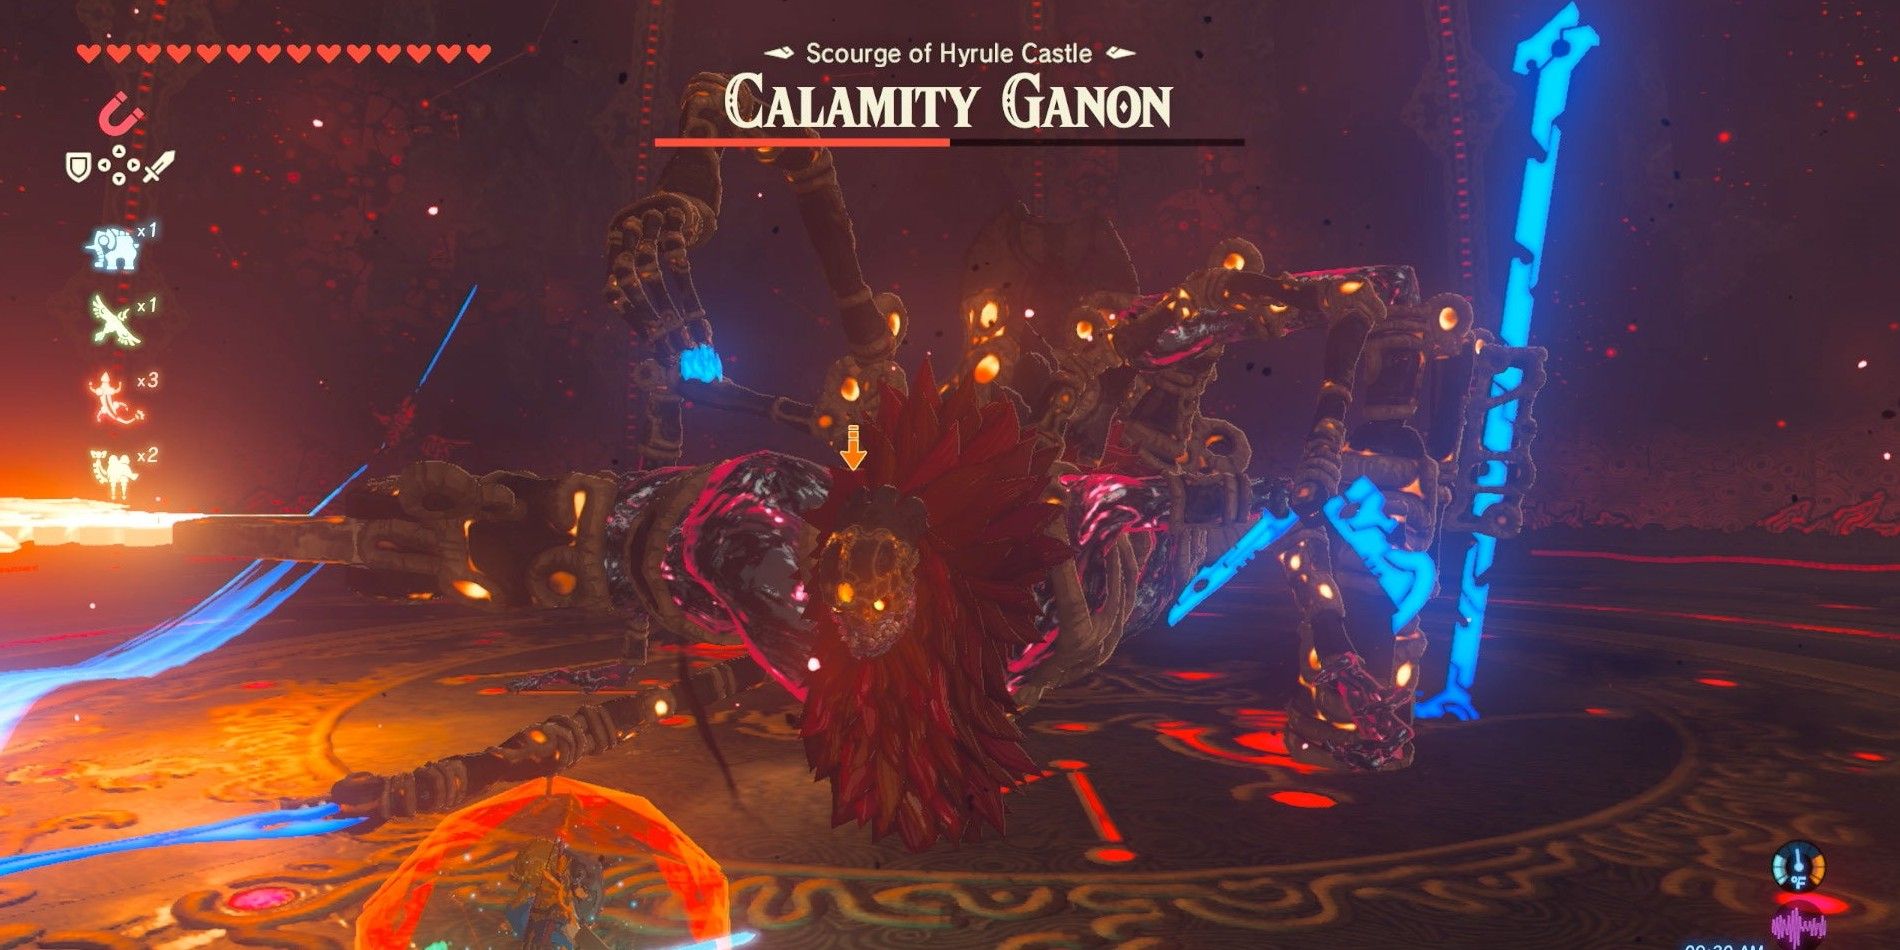 Dead Rising's Time Limit Would Make BOTW More Memorable - Calamity Ganon Image